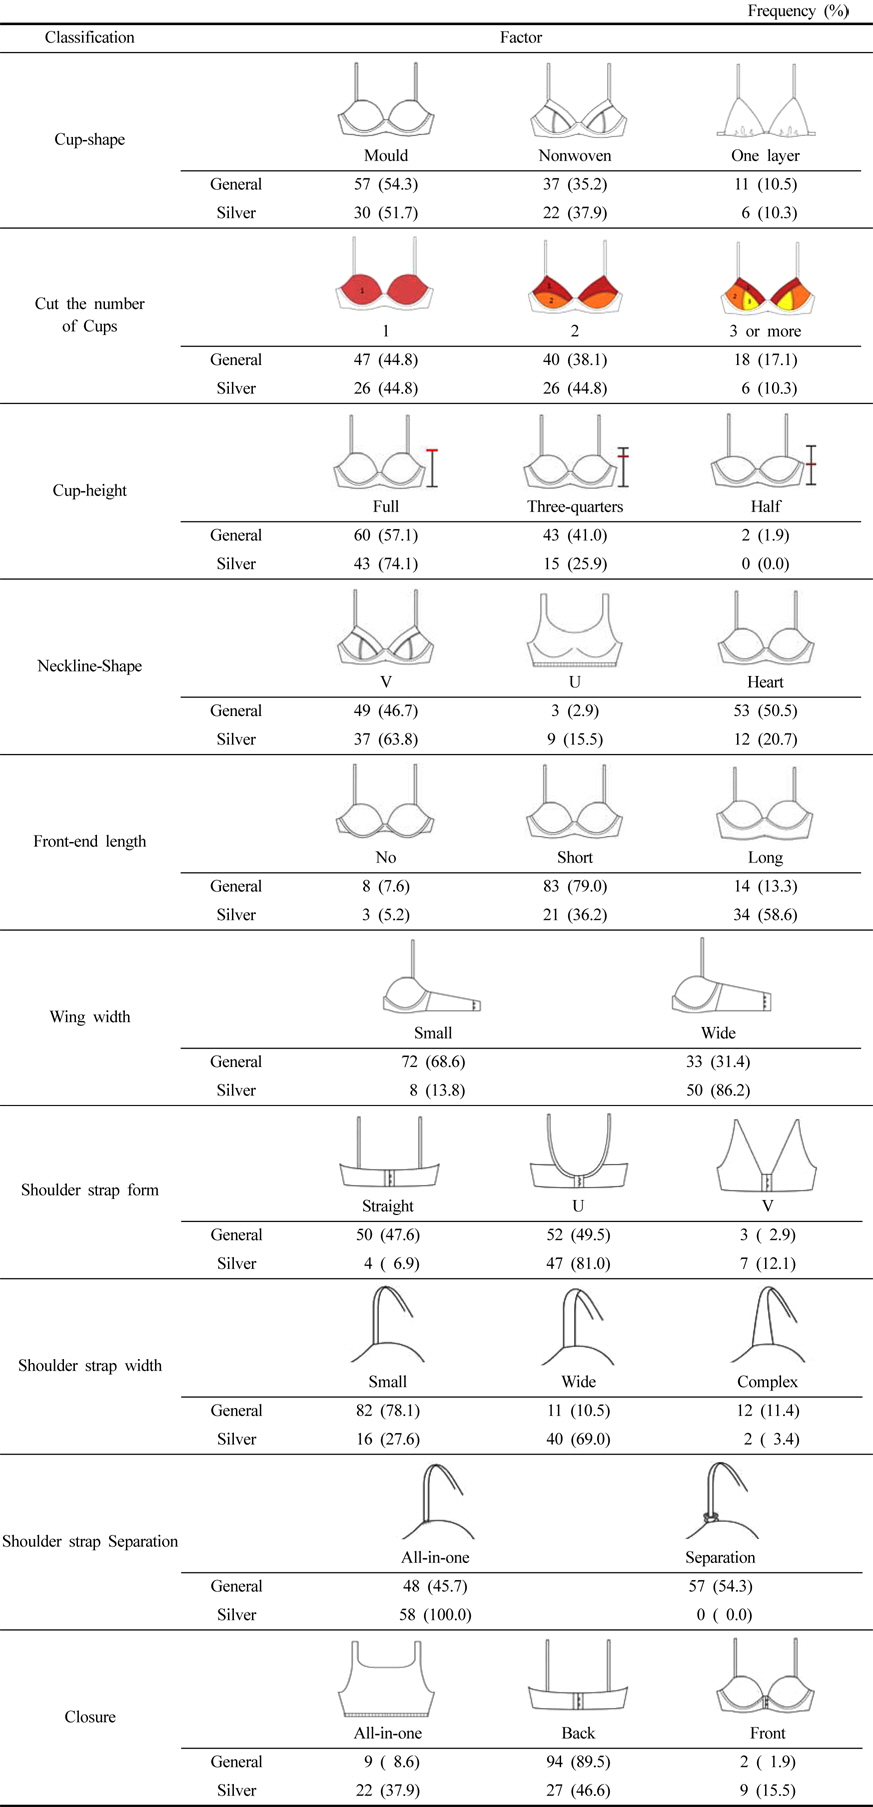 Classification of brassiere product form